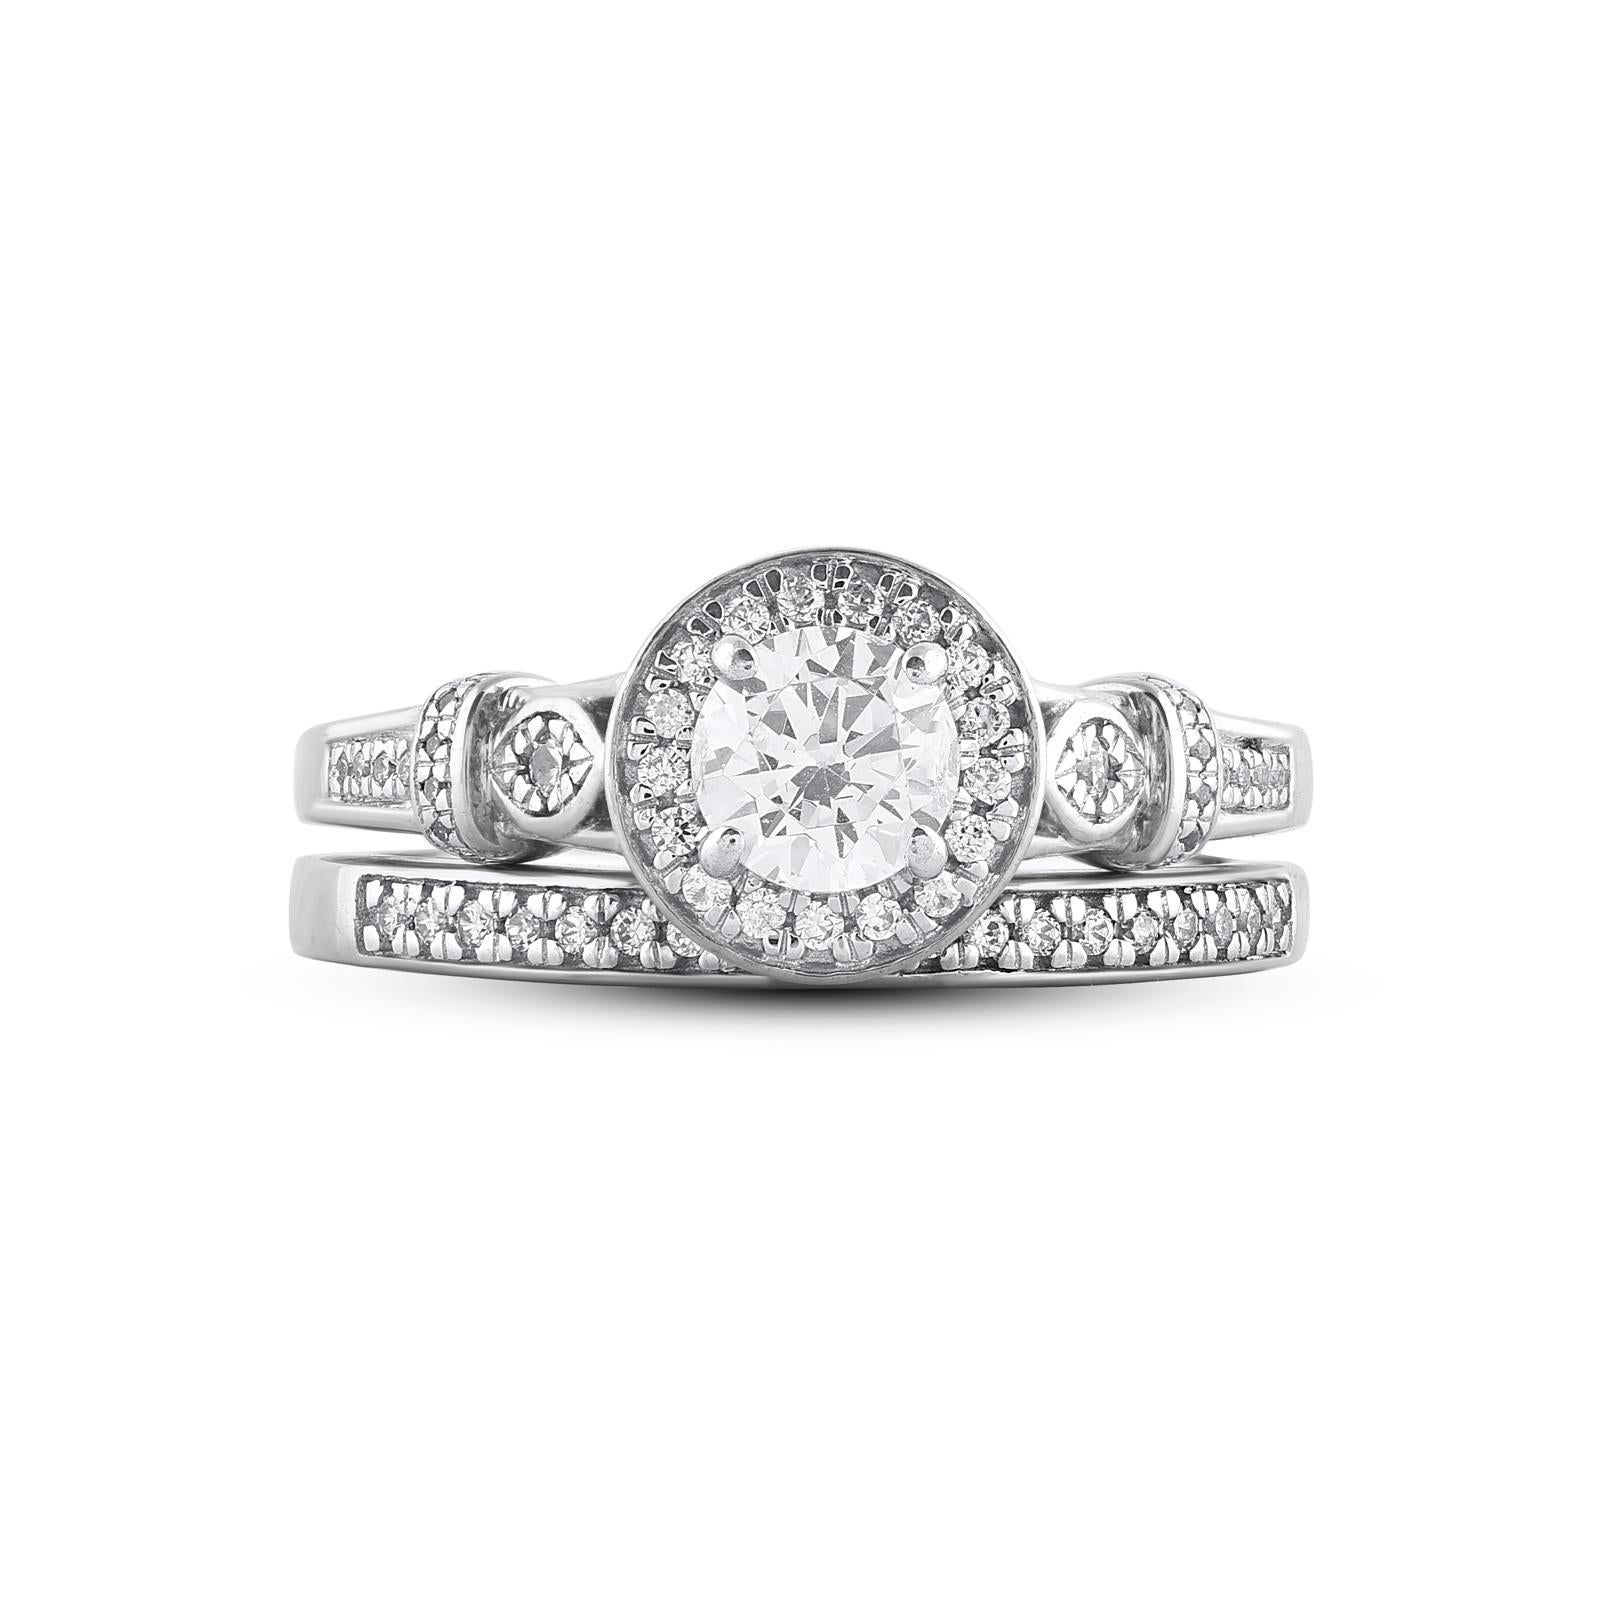 Express your love in the sweetest way with this round-cut diamond frame bridal set. Crafted in 14 Karat white gold. This wedding ring features a sparkling 59 brilliant cut and single cut round diamonds beautifully set in prong, pave and bezel